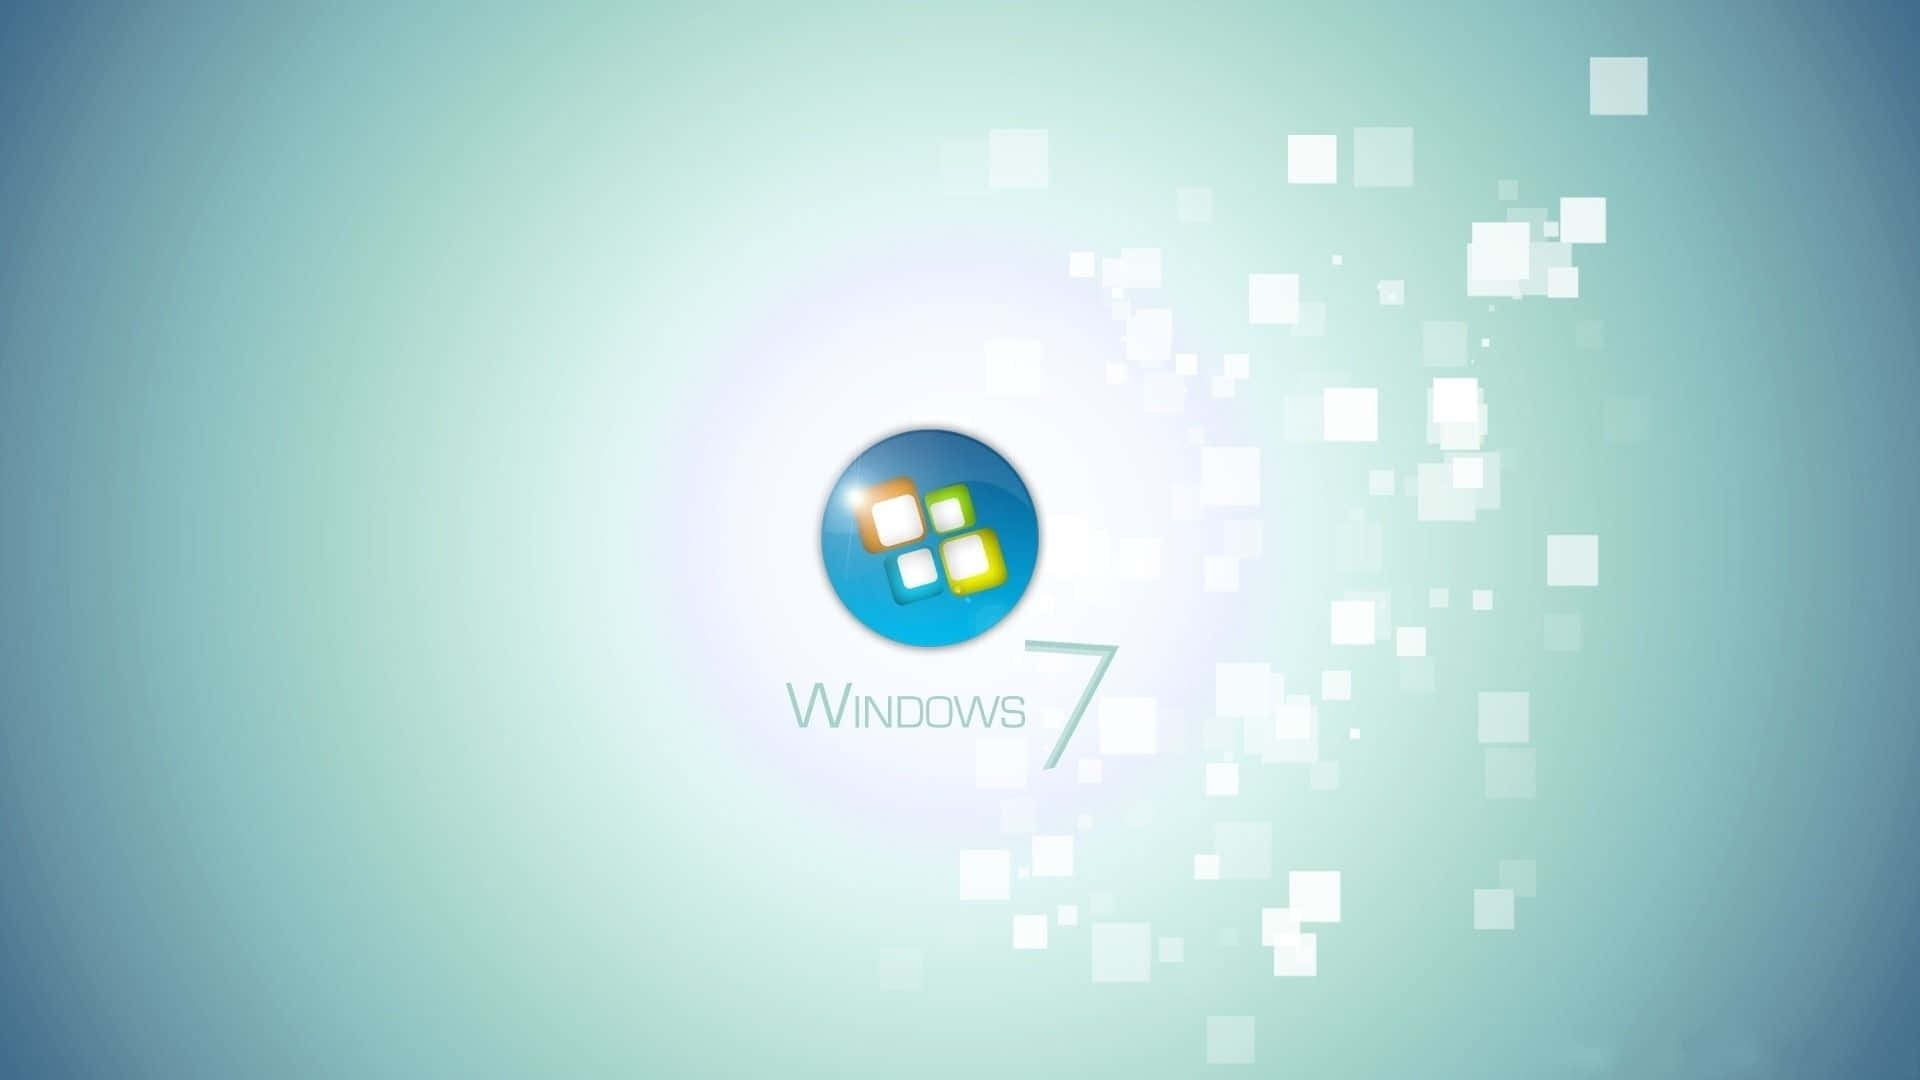 The intricacies of an Operating System Wallpaper